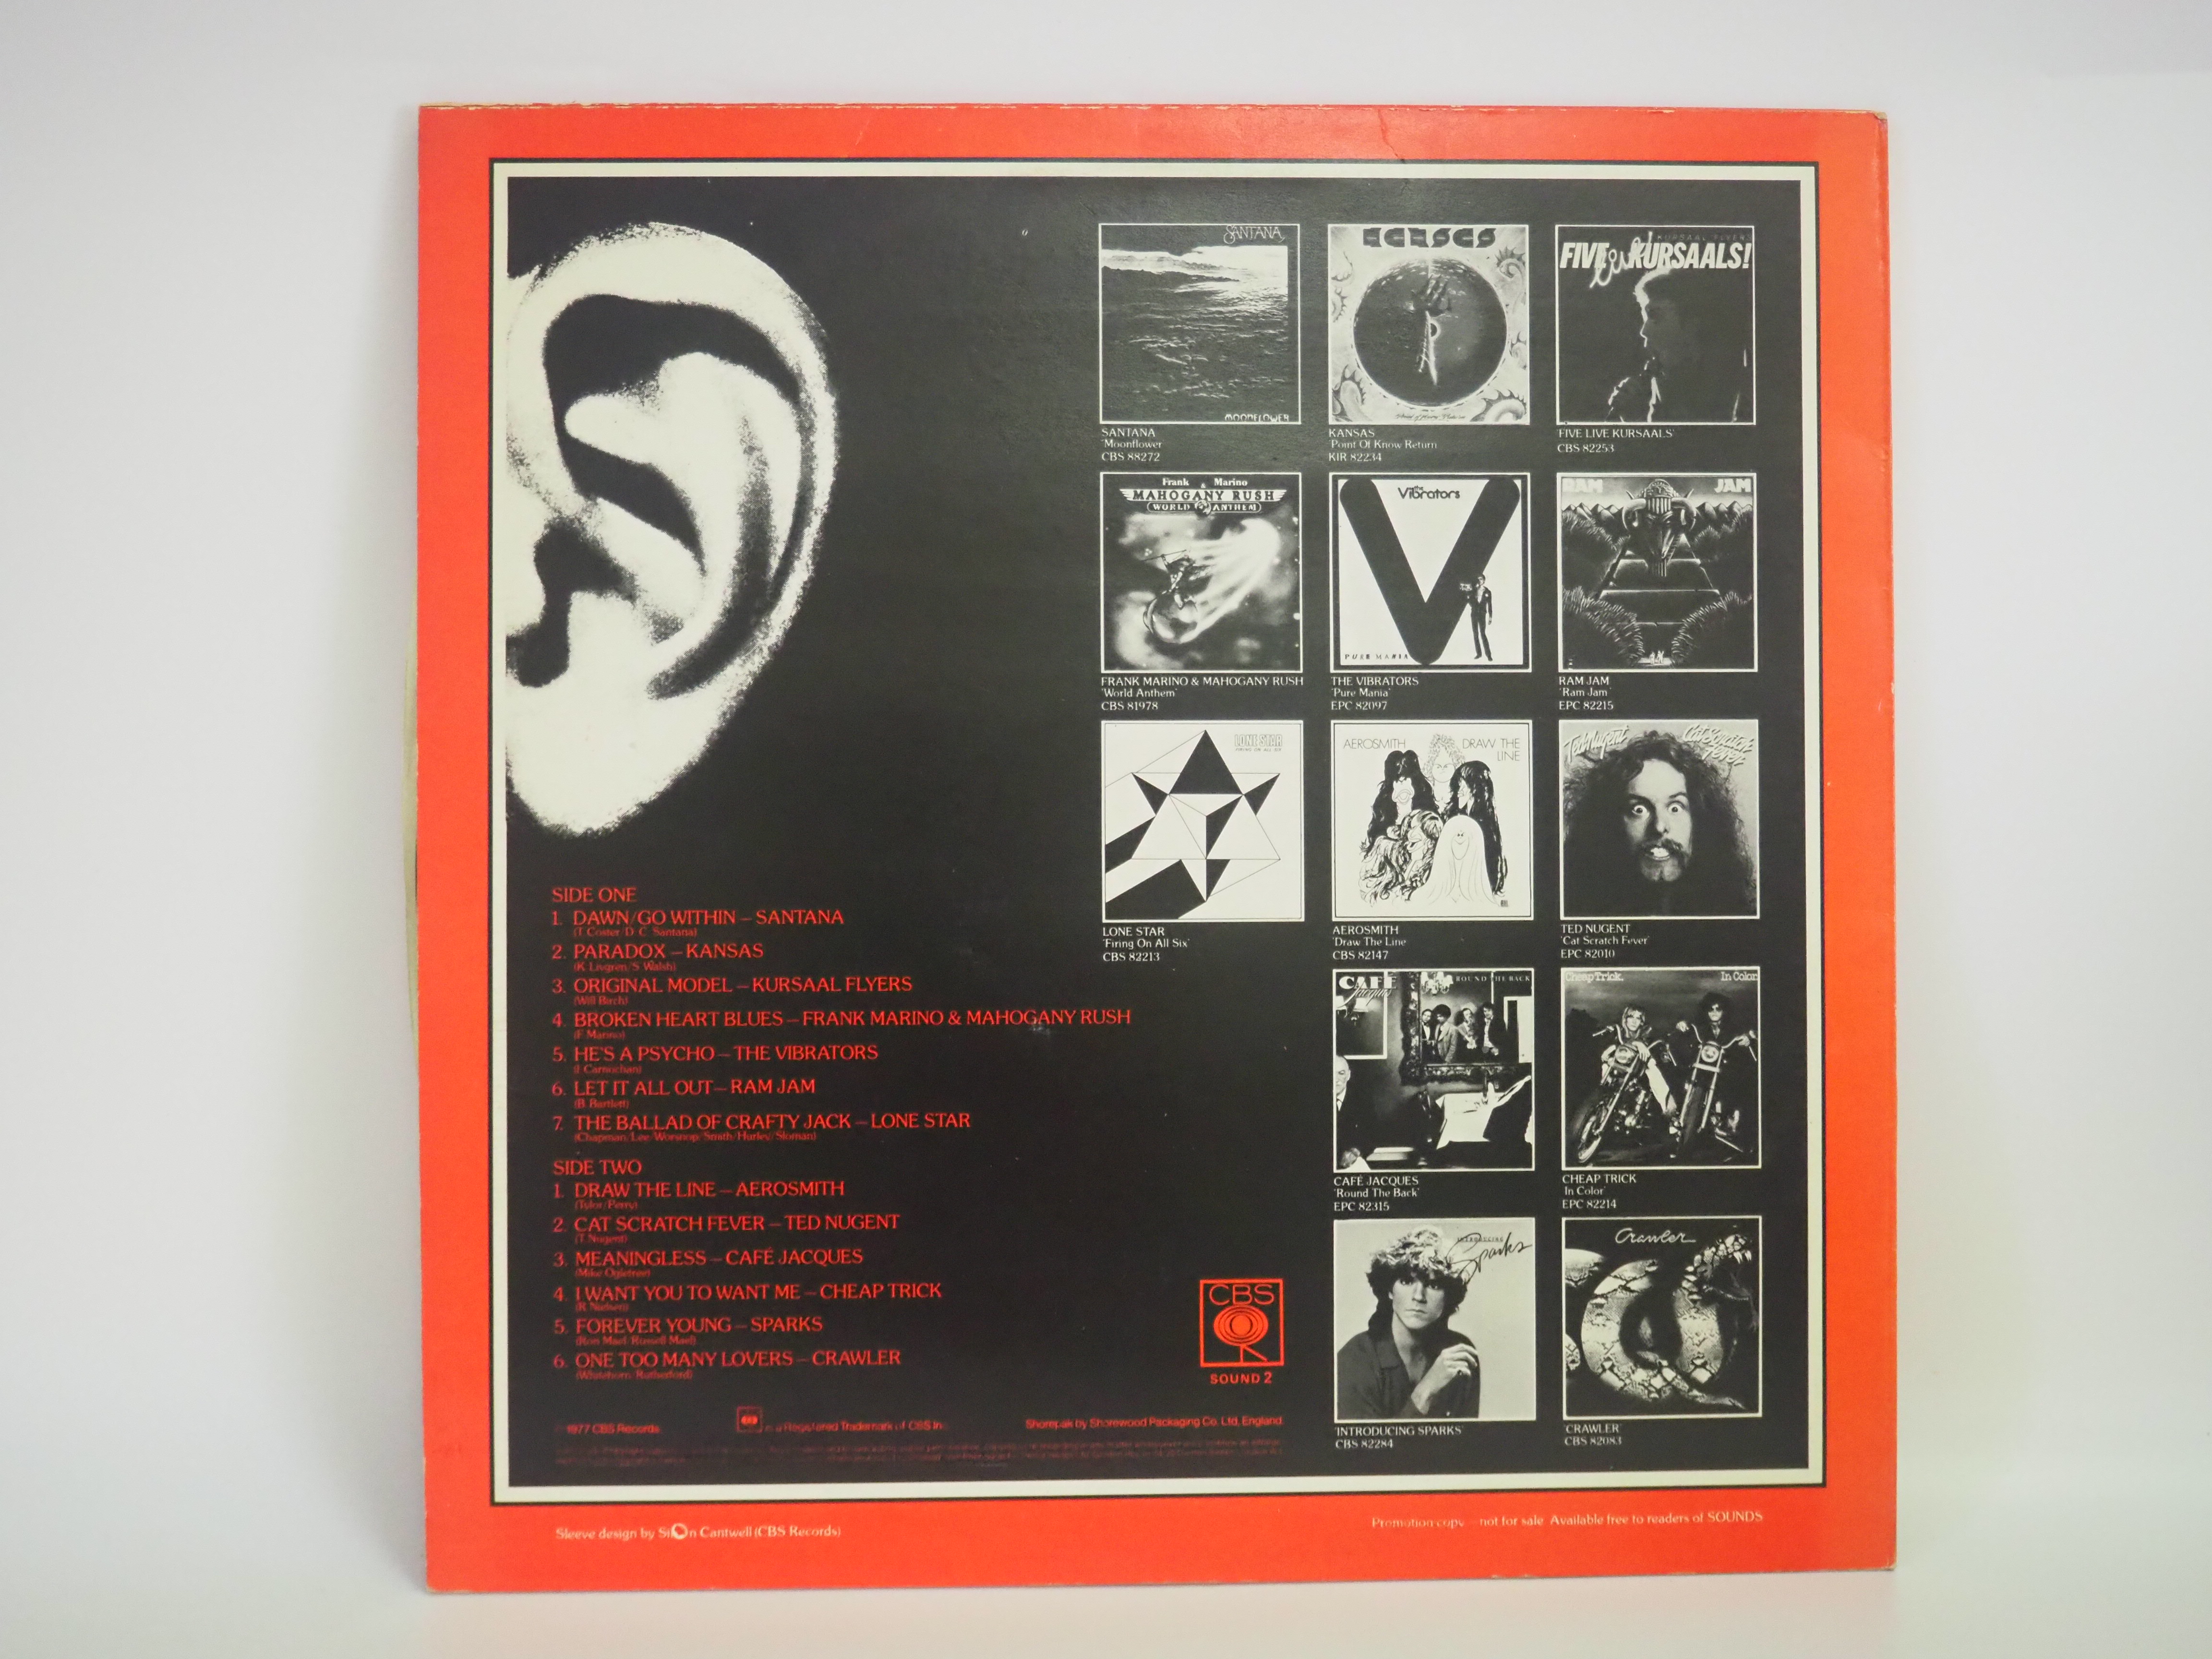 Sounds -Volume 2 - Various Artists - 12" Vinyl - Image 2 of 2